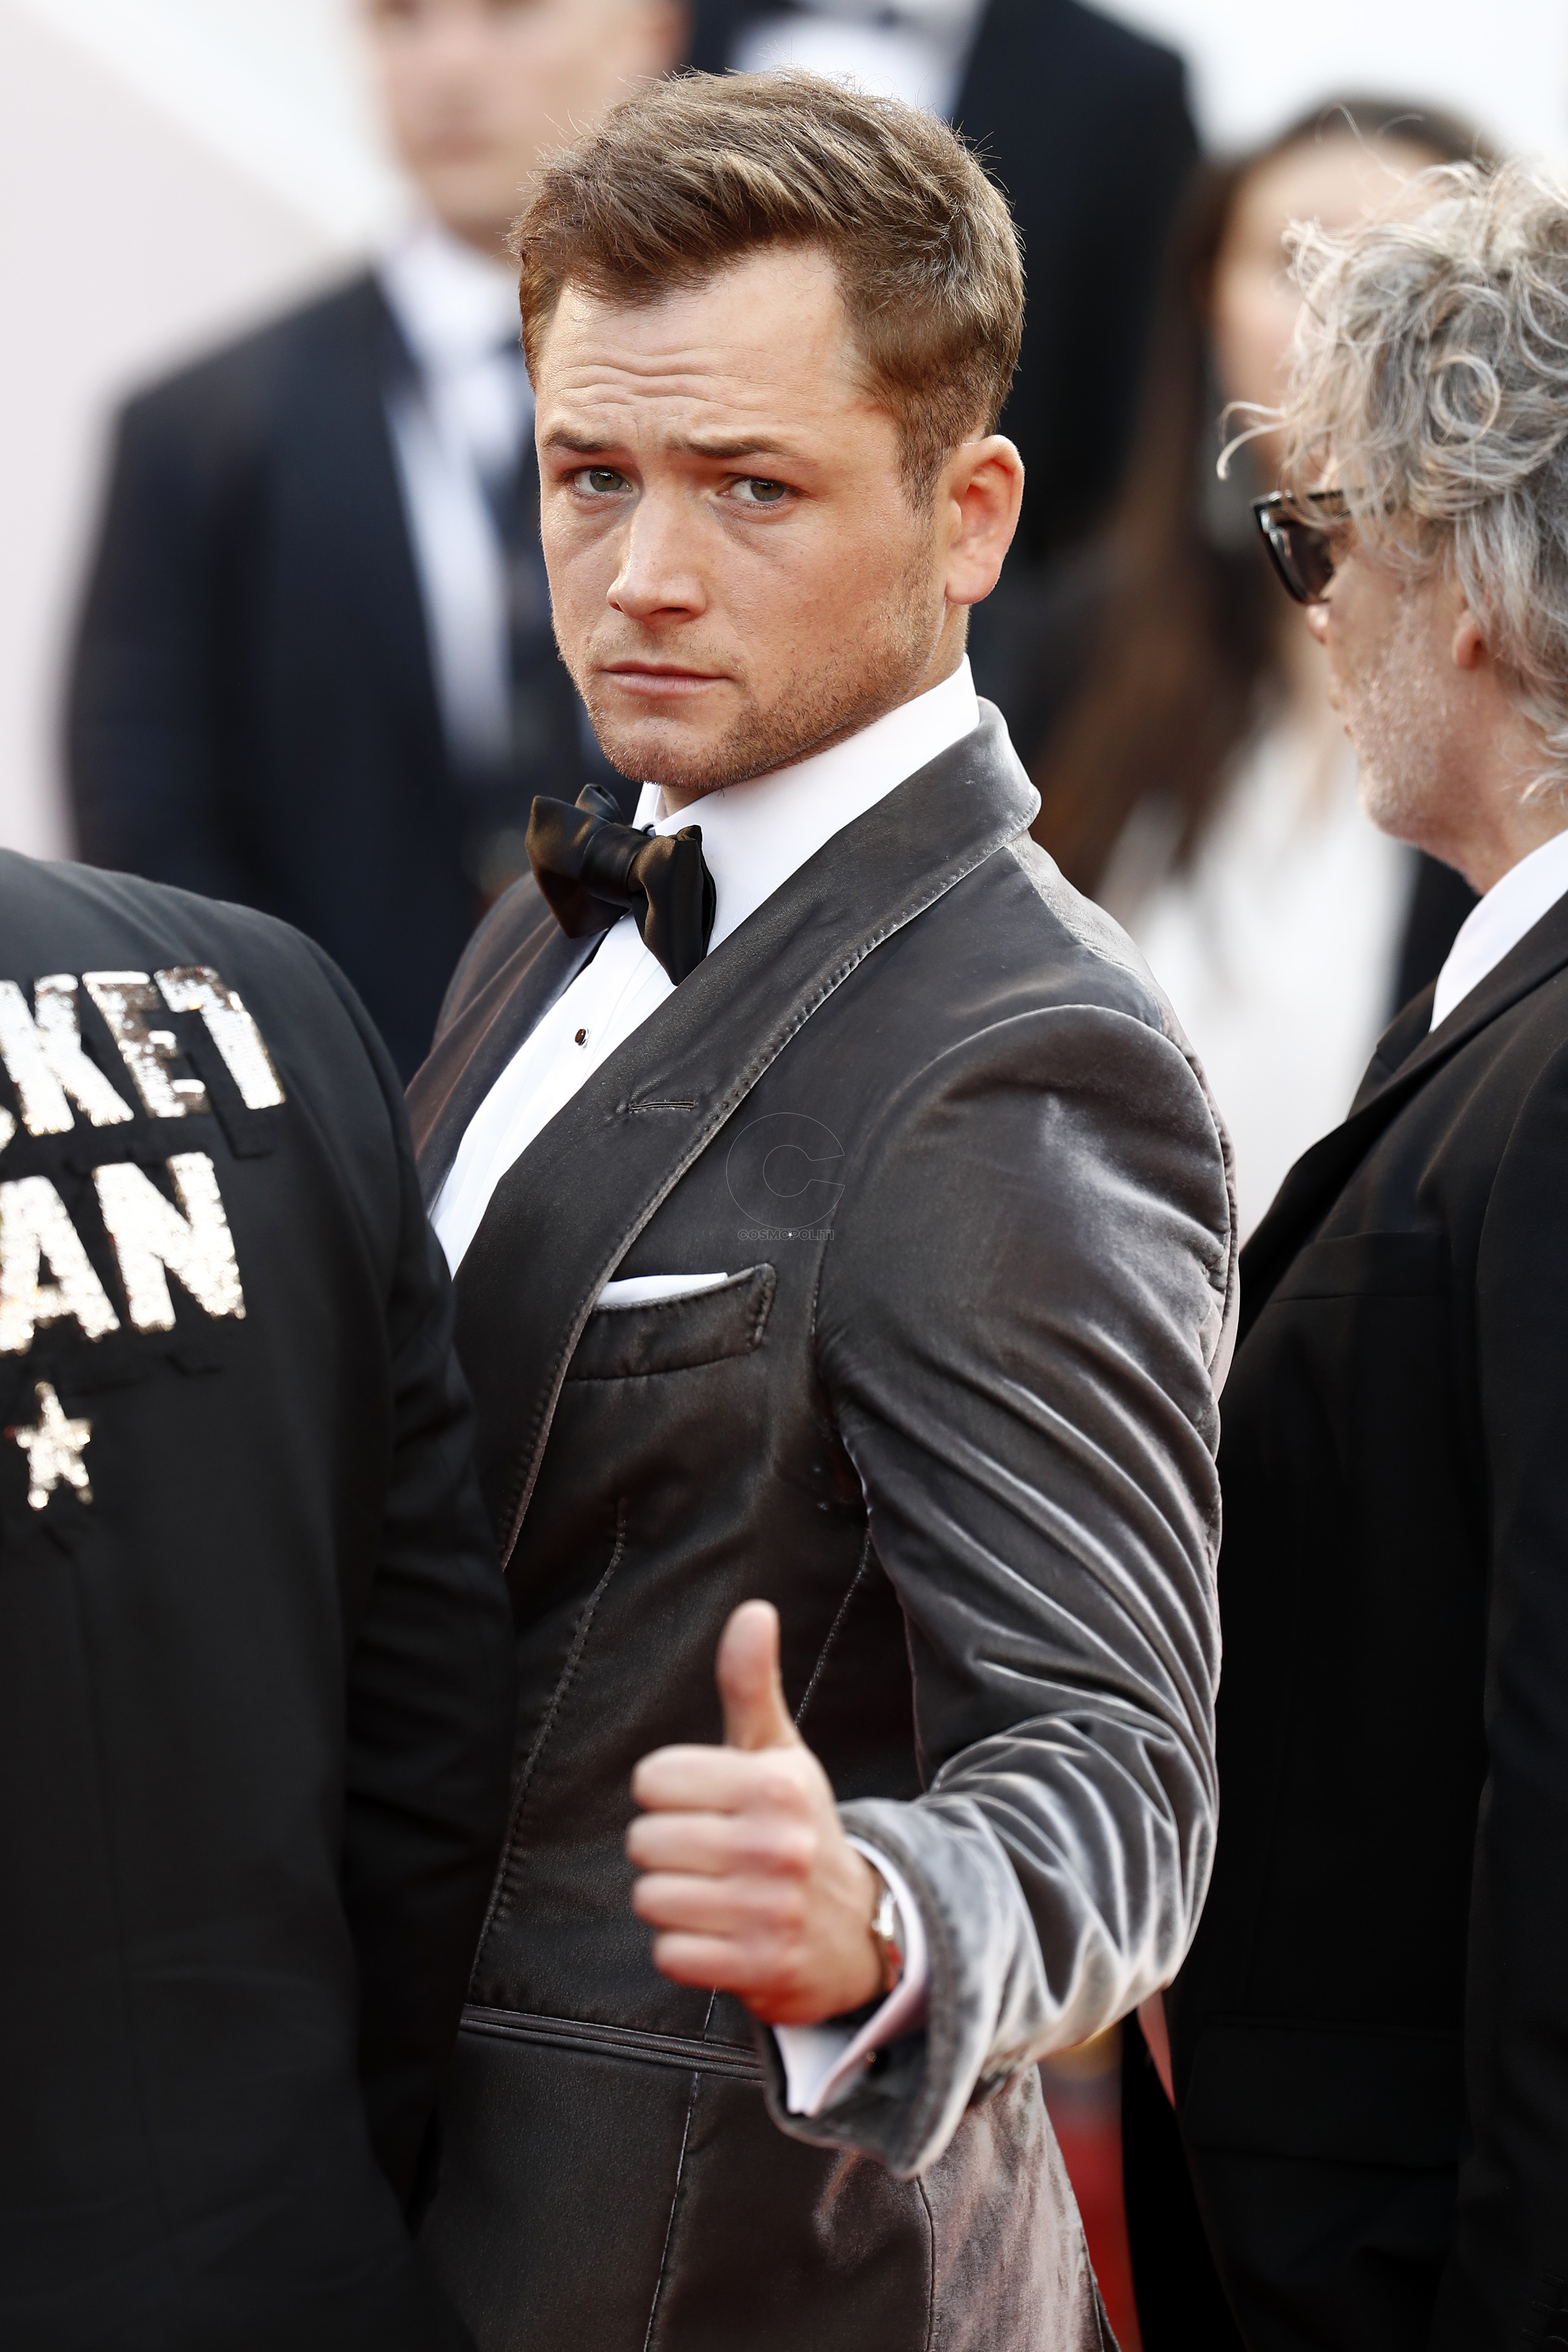 CANNES, FRANCE - MAY 16: Taron Egerton attends the screening of "Rocket Man" during the 72nd annual Cannes Film Festival on May 16, 2019 in Cannes, France. (Photo by John Phillips/Getty Images for Paramount Pictures)